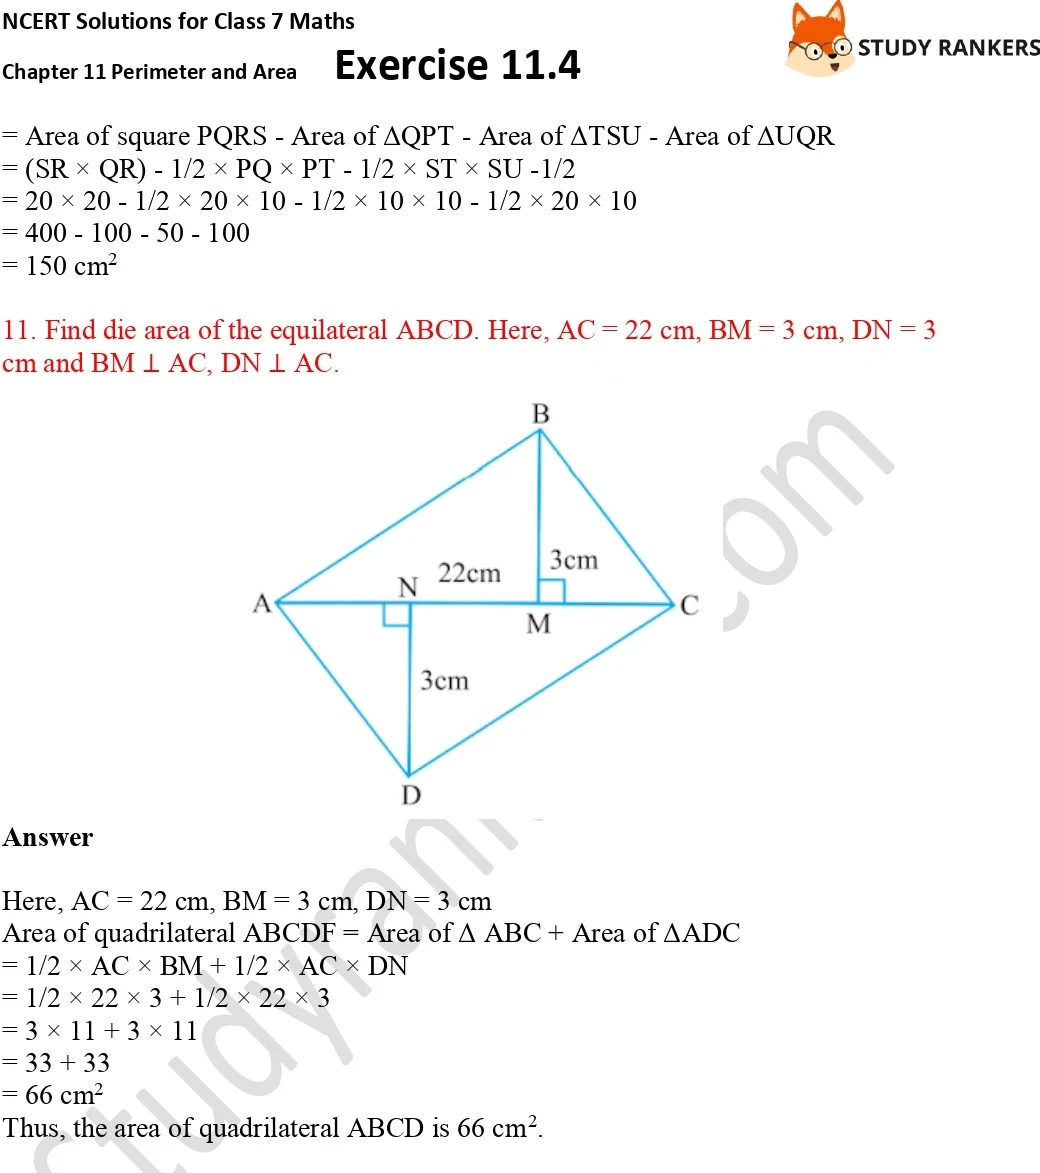 NCERT Solutions for Class 7 Maths Ch 11 Perimeter and Area Exercise 11.4 Part 8